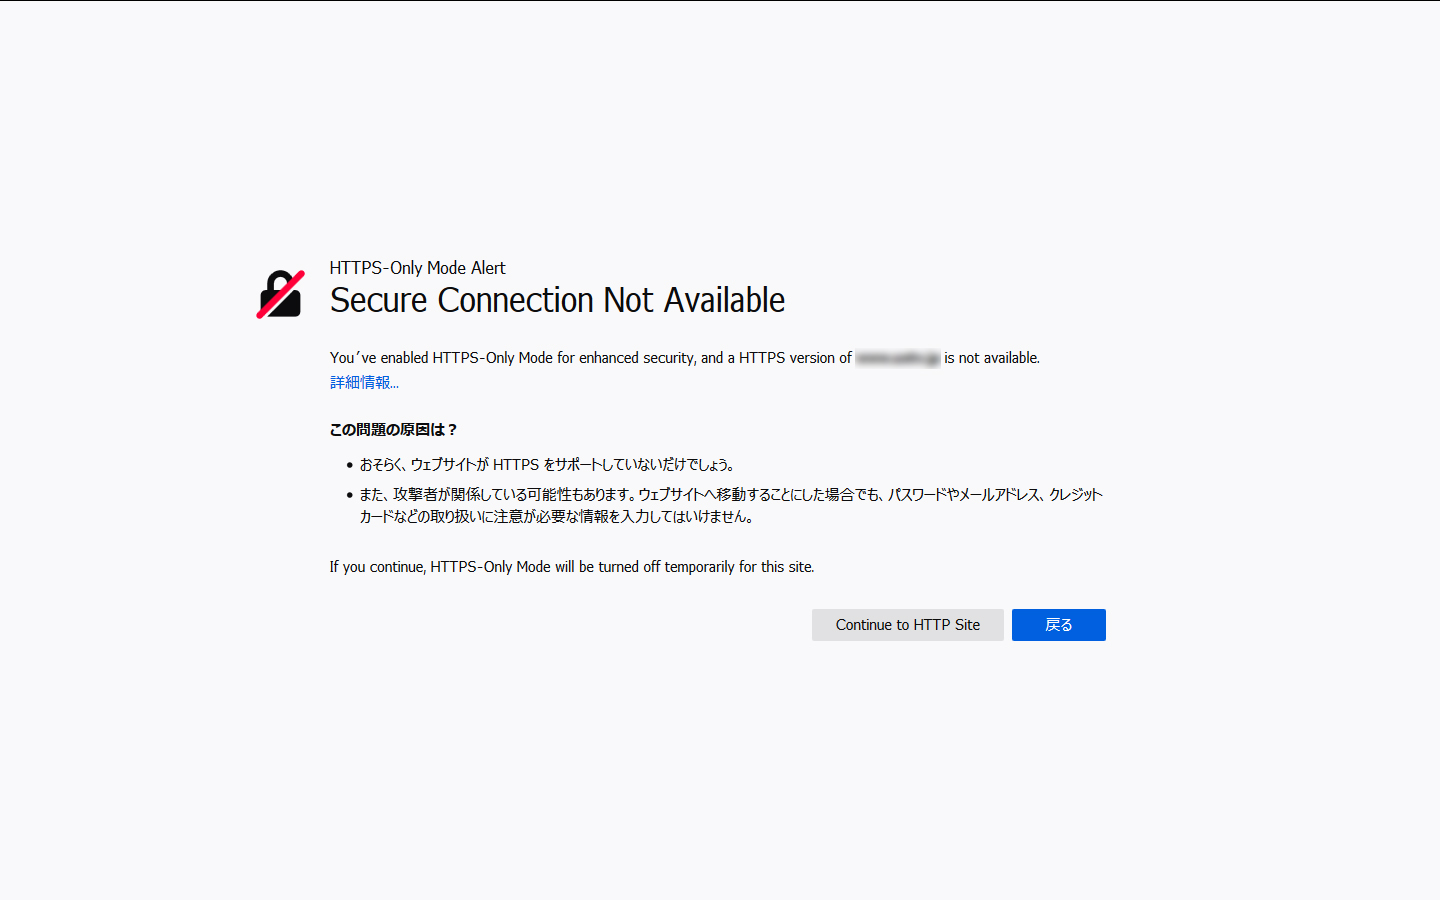 Secure Connection Not Available